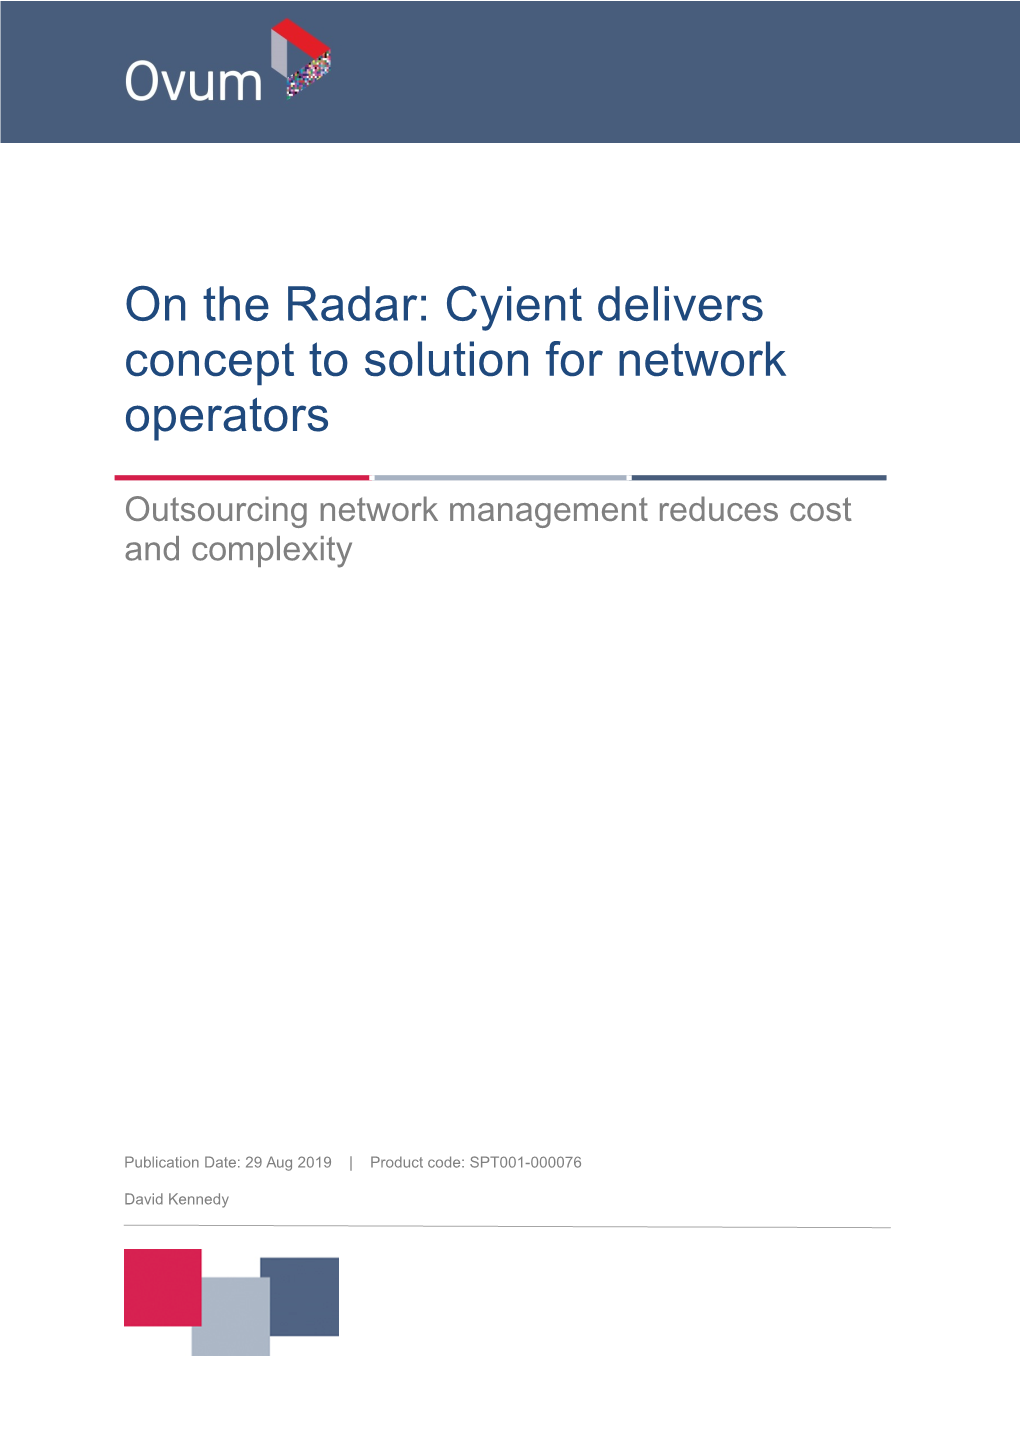 On the Radar: Cyient Delivers Concept to Solution for Network Operators